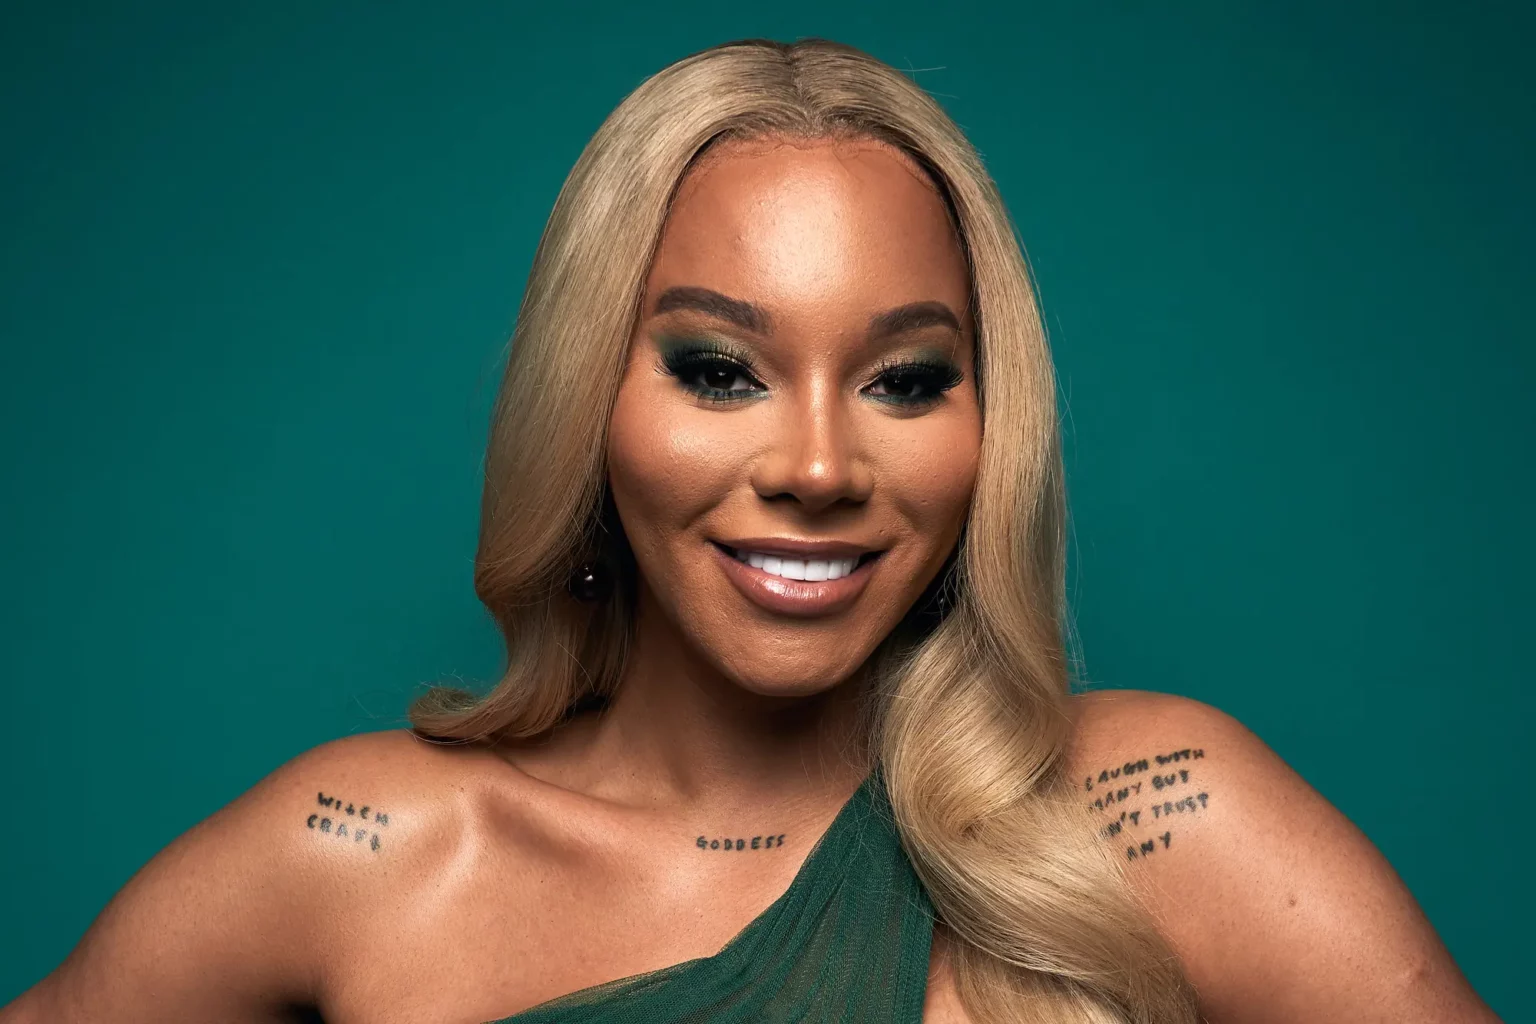 Model and activist Munroe Bergdorf poses smiling in front of a green background